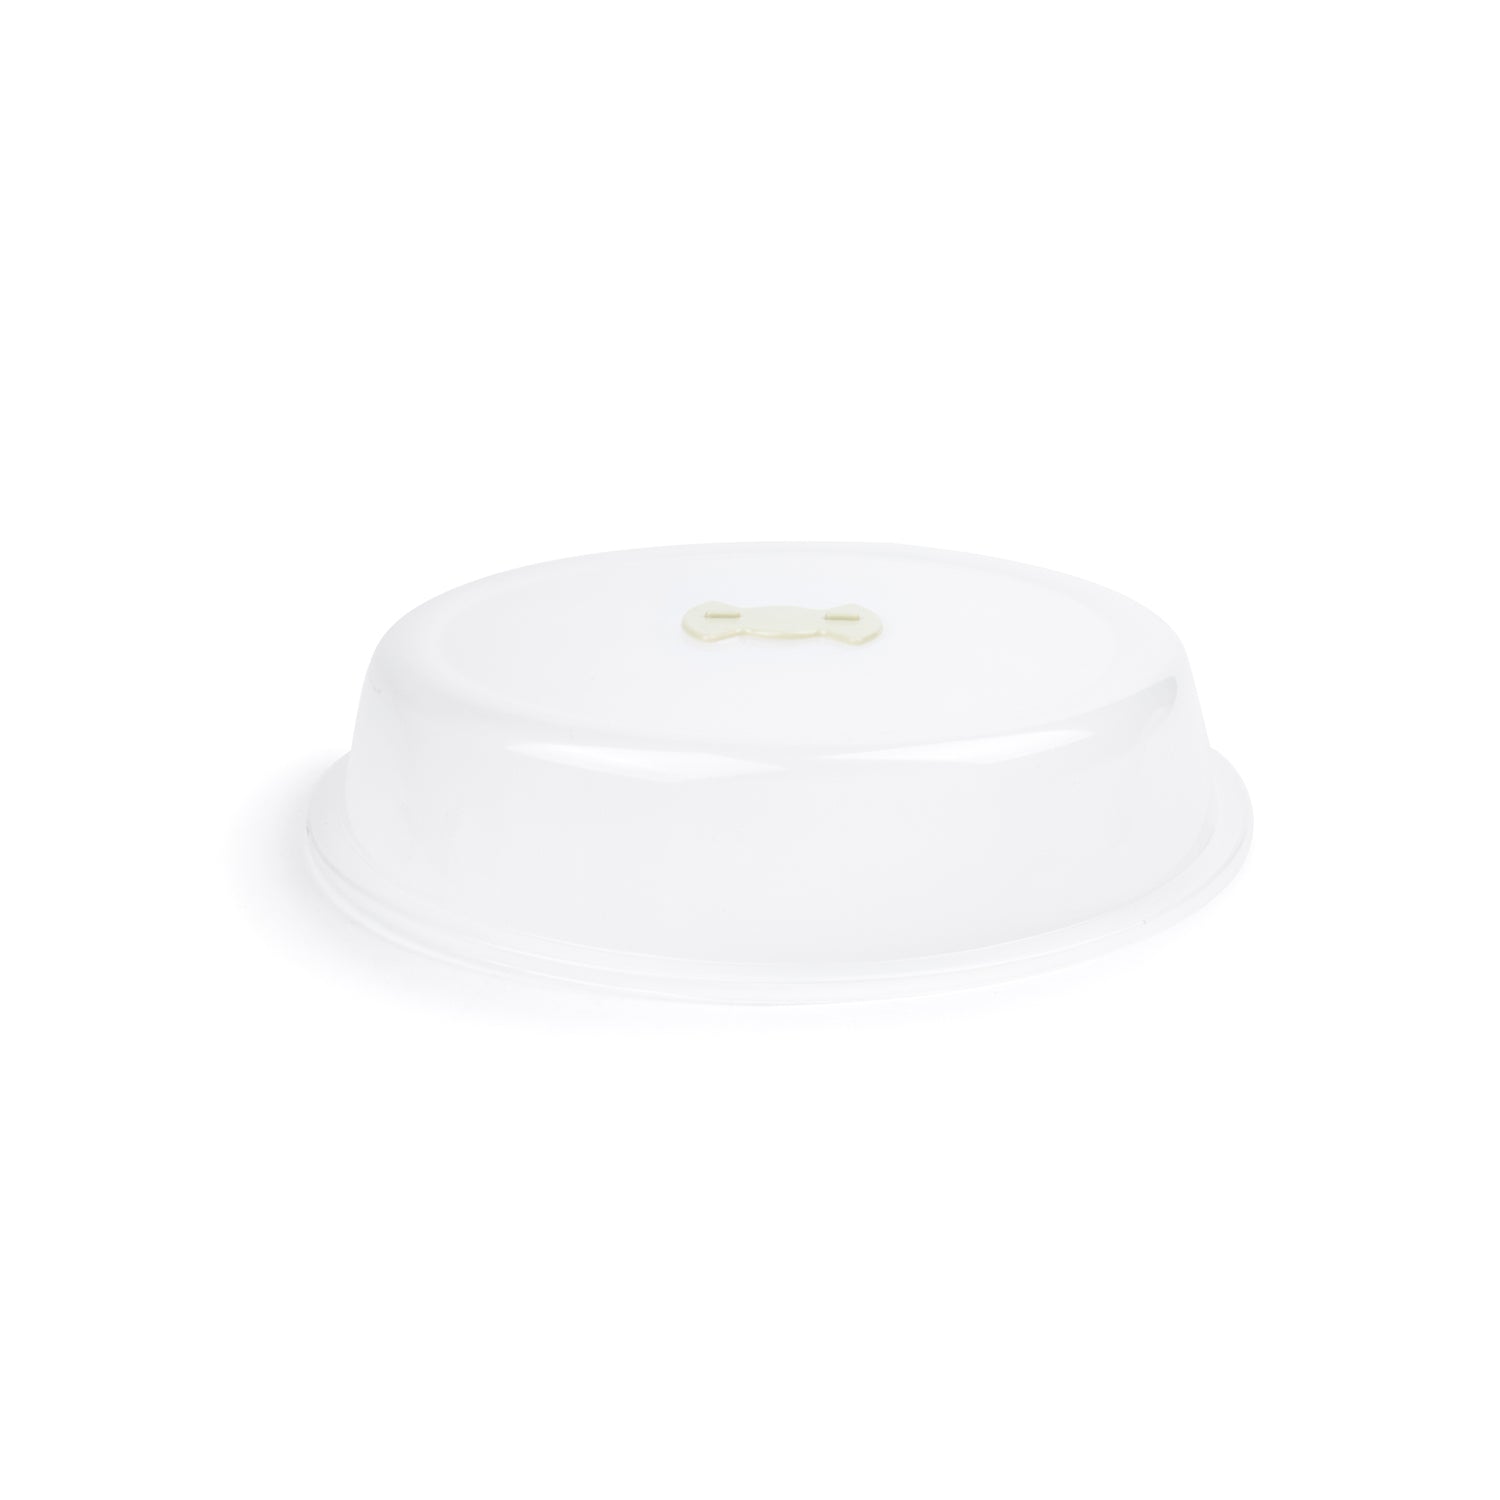 Norpro Vented Dome Microwave Food Cover Lid, 9